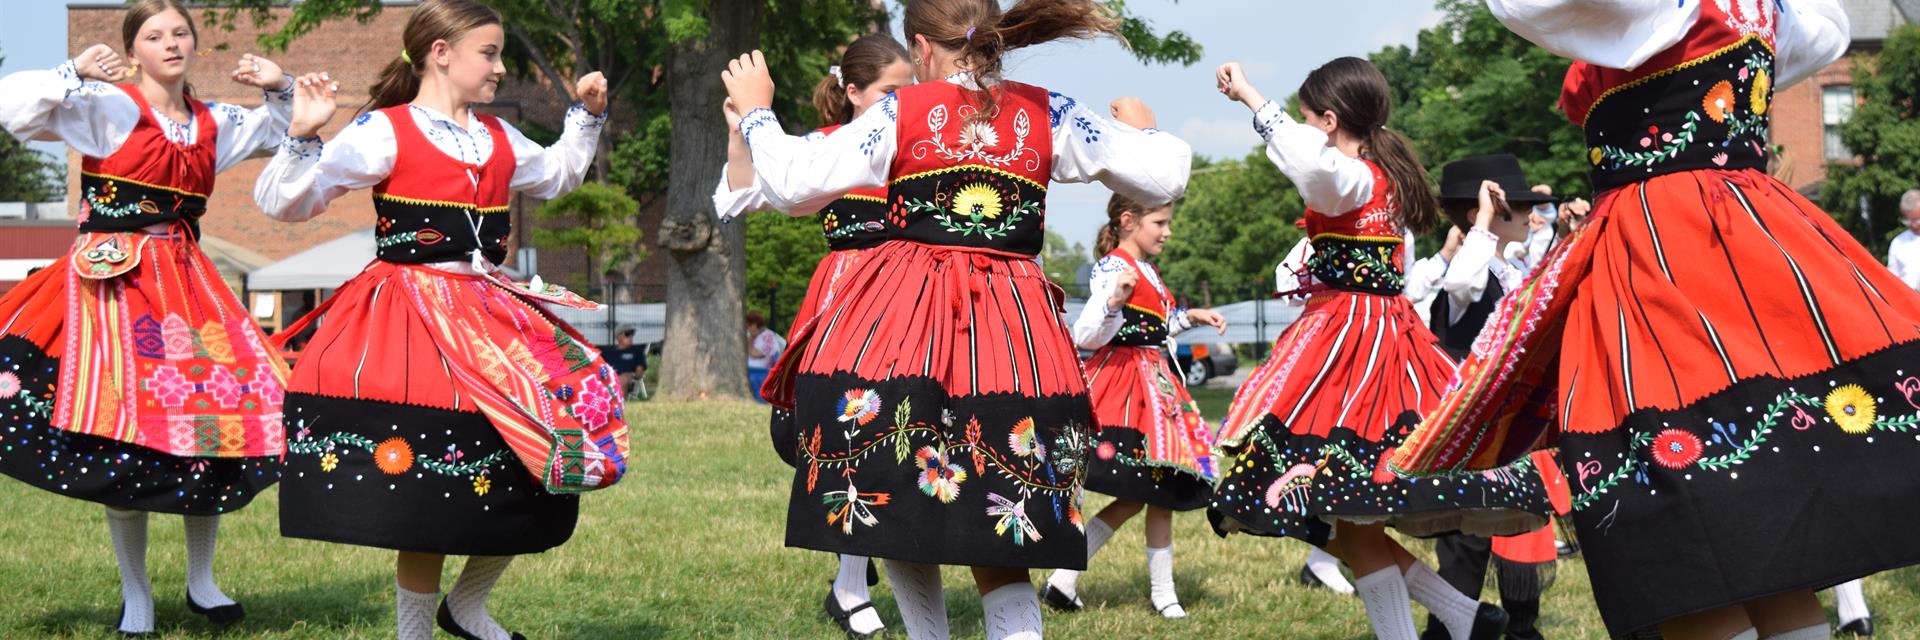 Group of people dance in traditional costumes